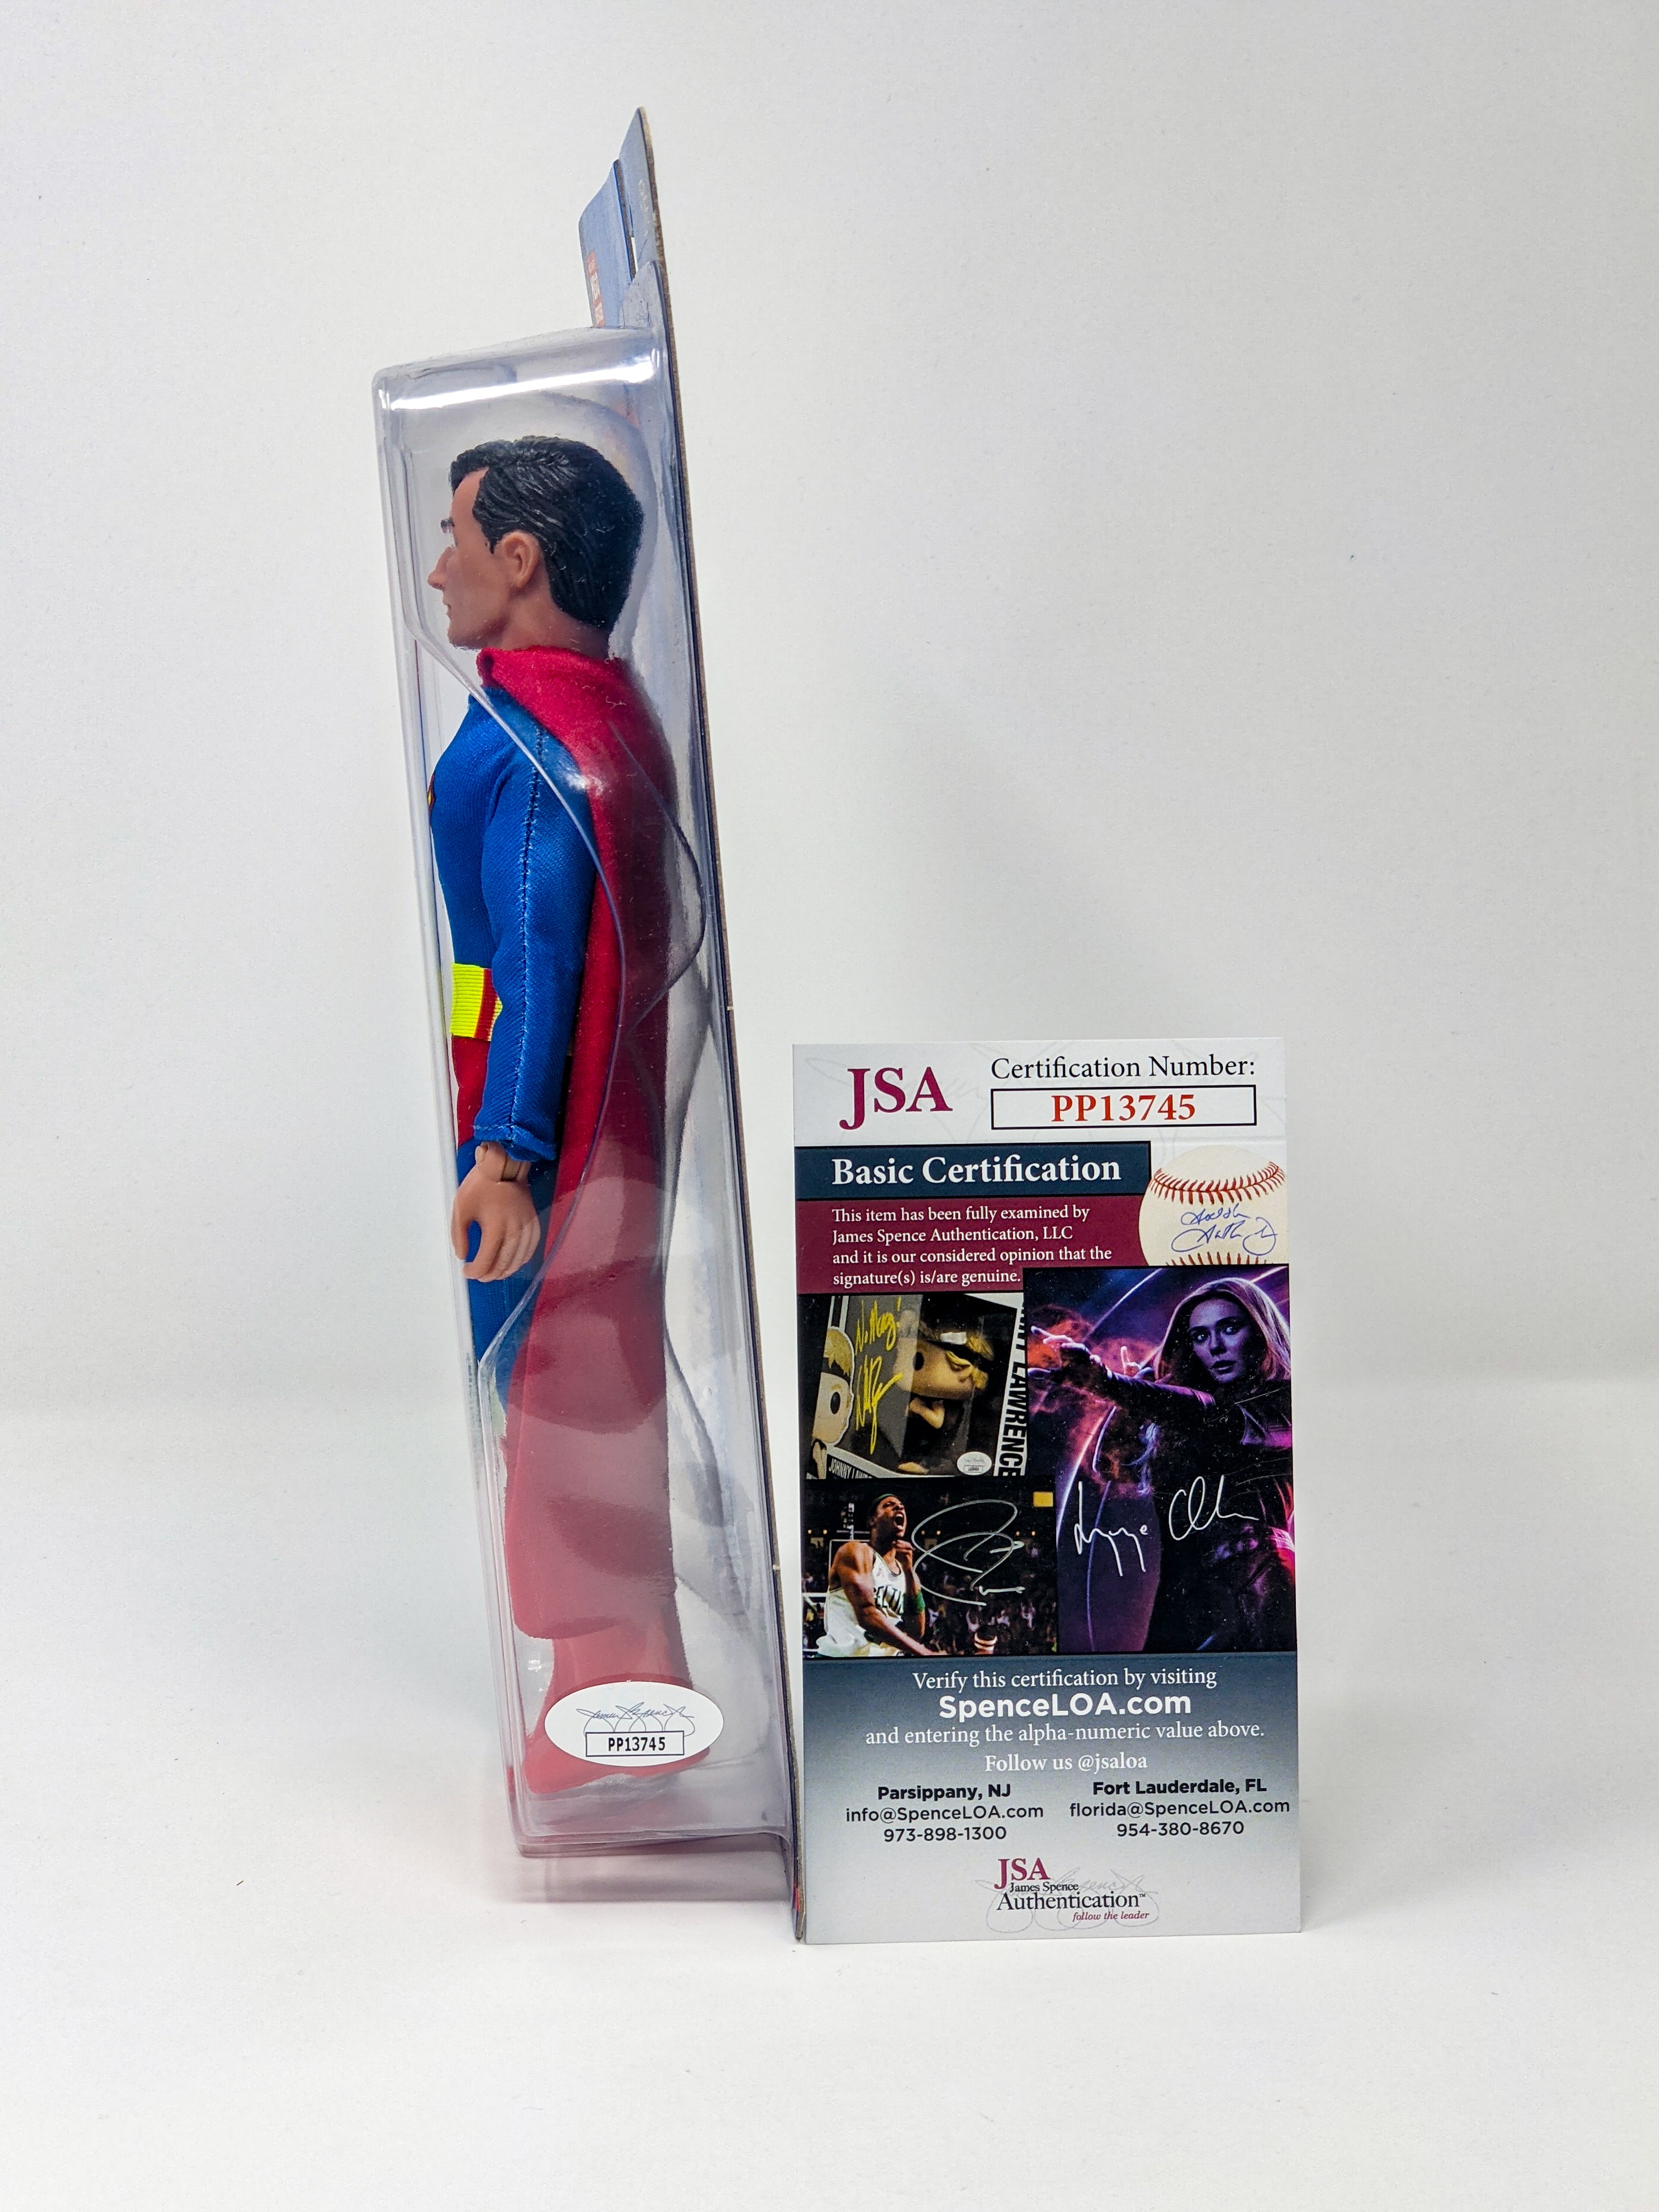 Tim Daly DC Superman Signed Mego Action Figure JSA Certified Autograph GalaxyCon